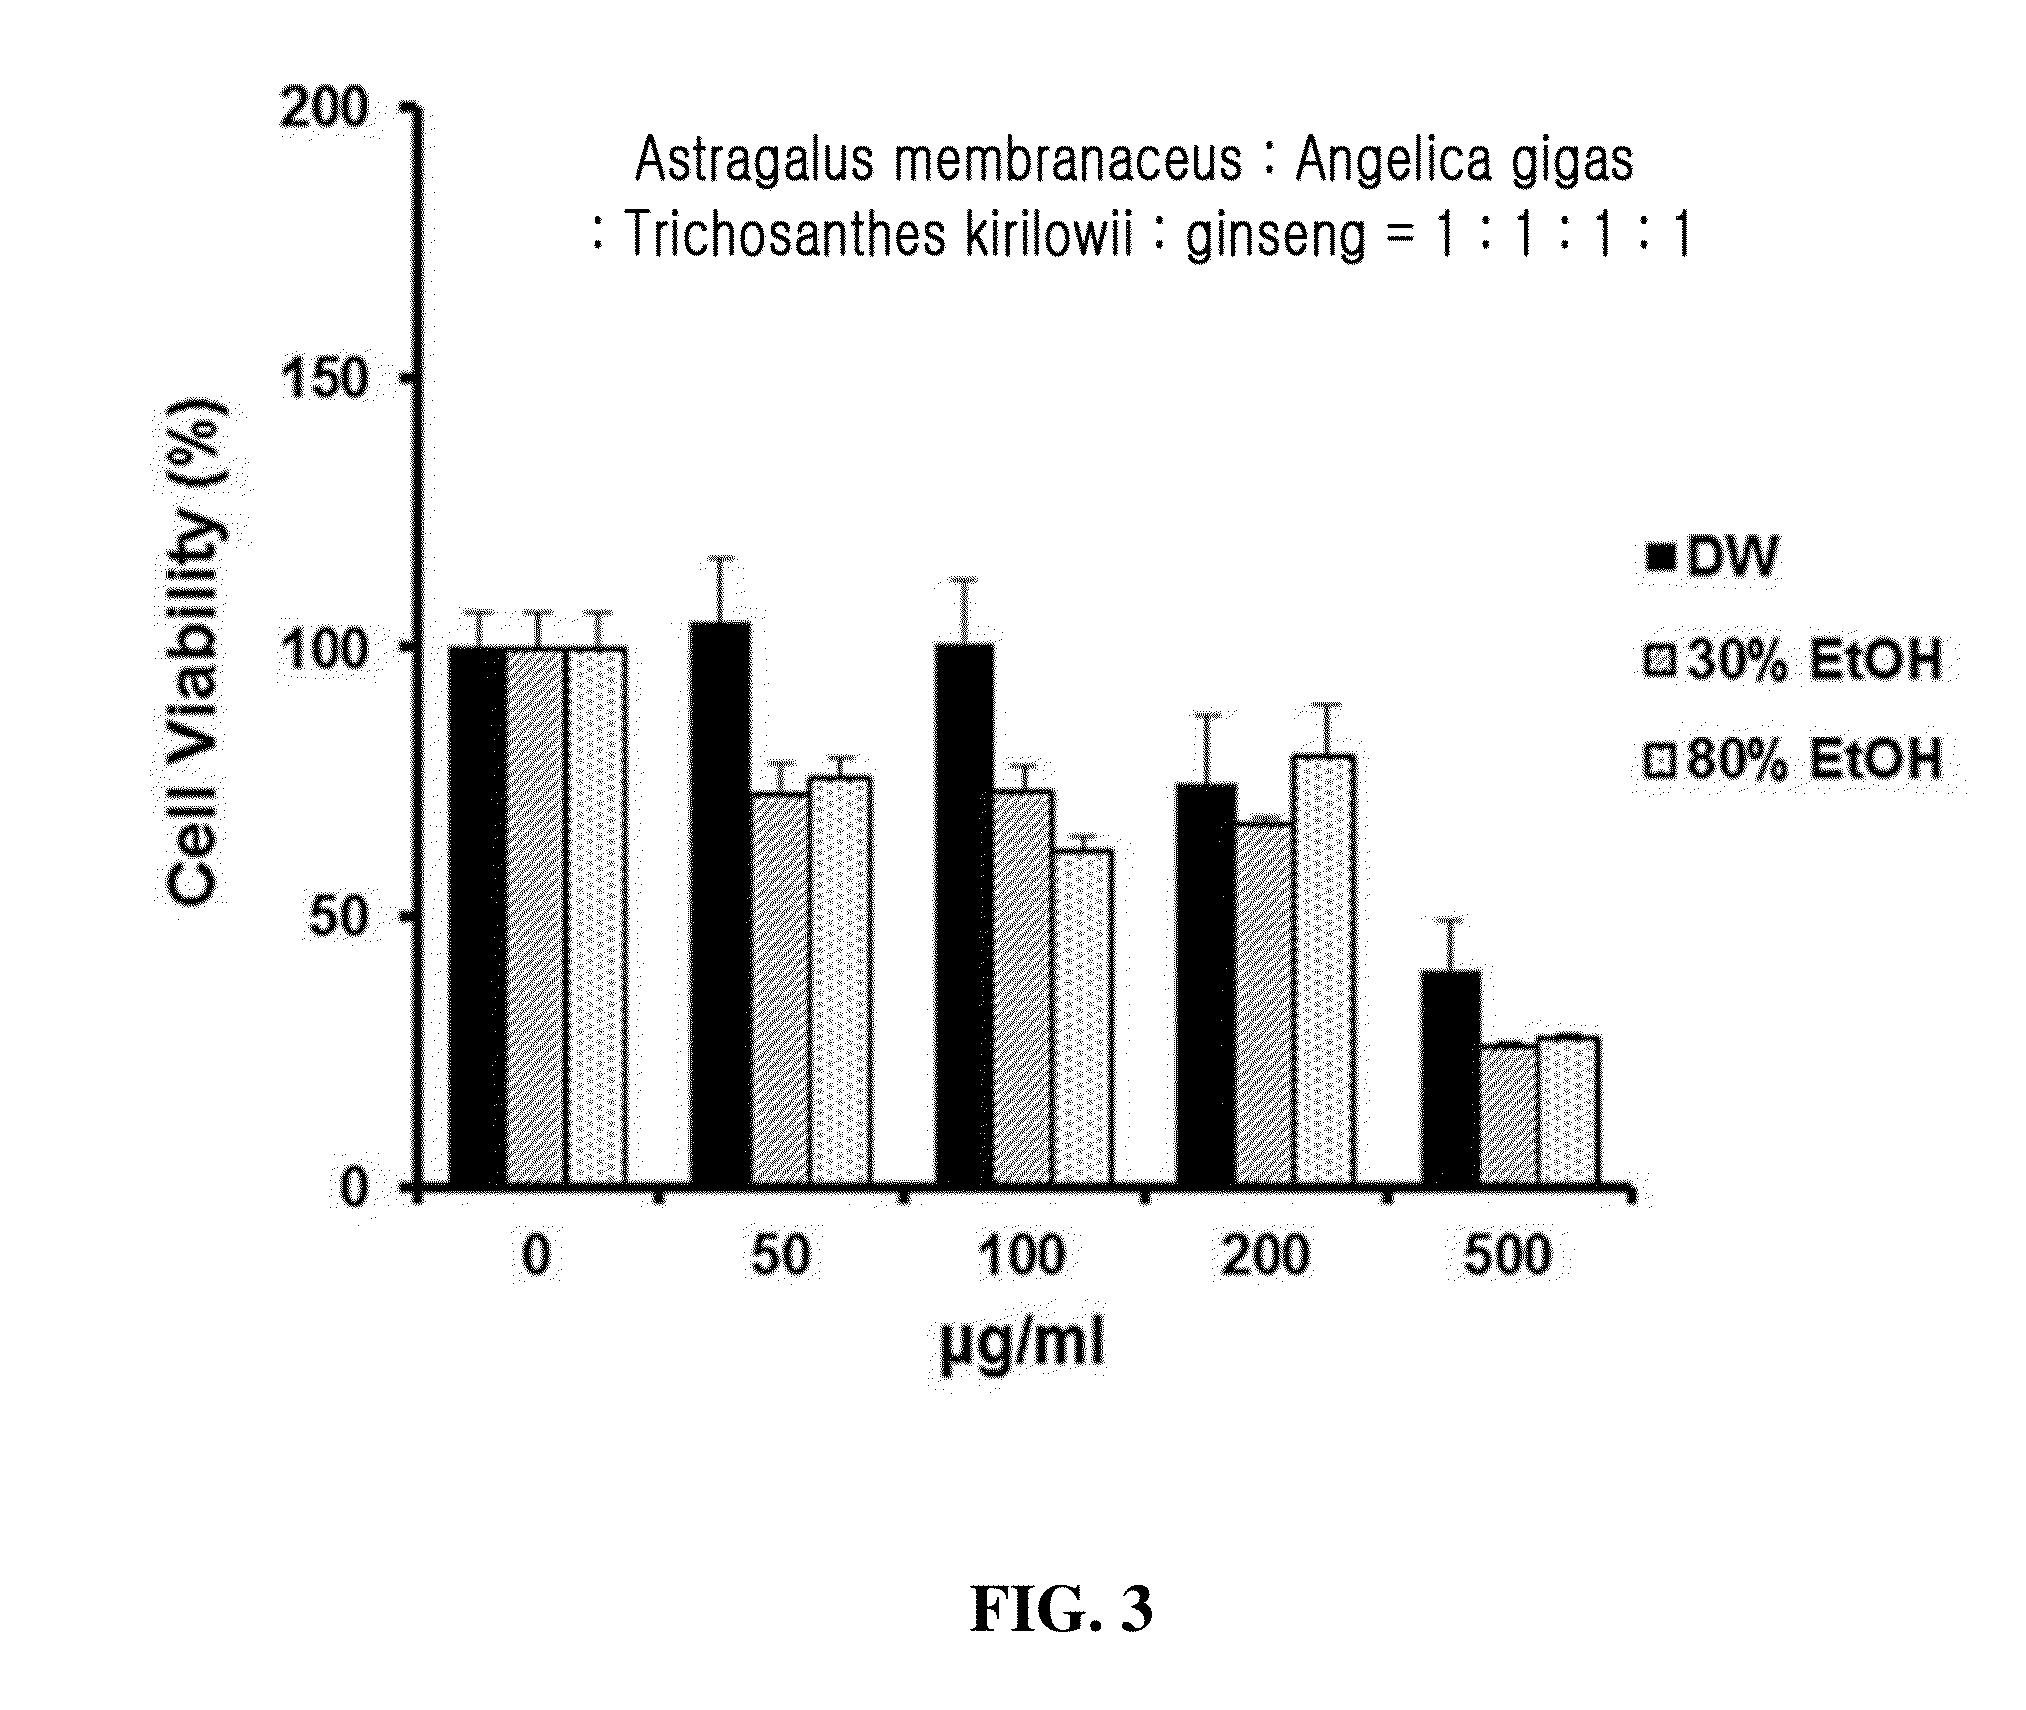 Anticancer composition containing mixed herbal medicine extract as active ingredient